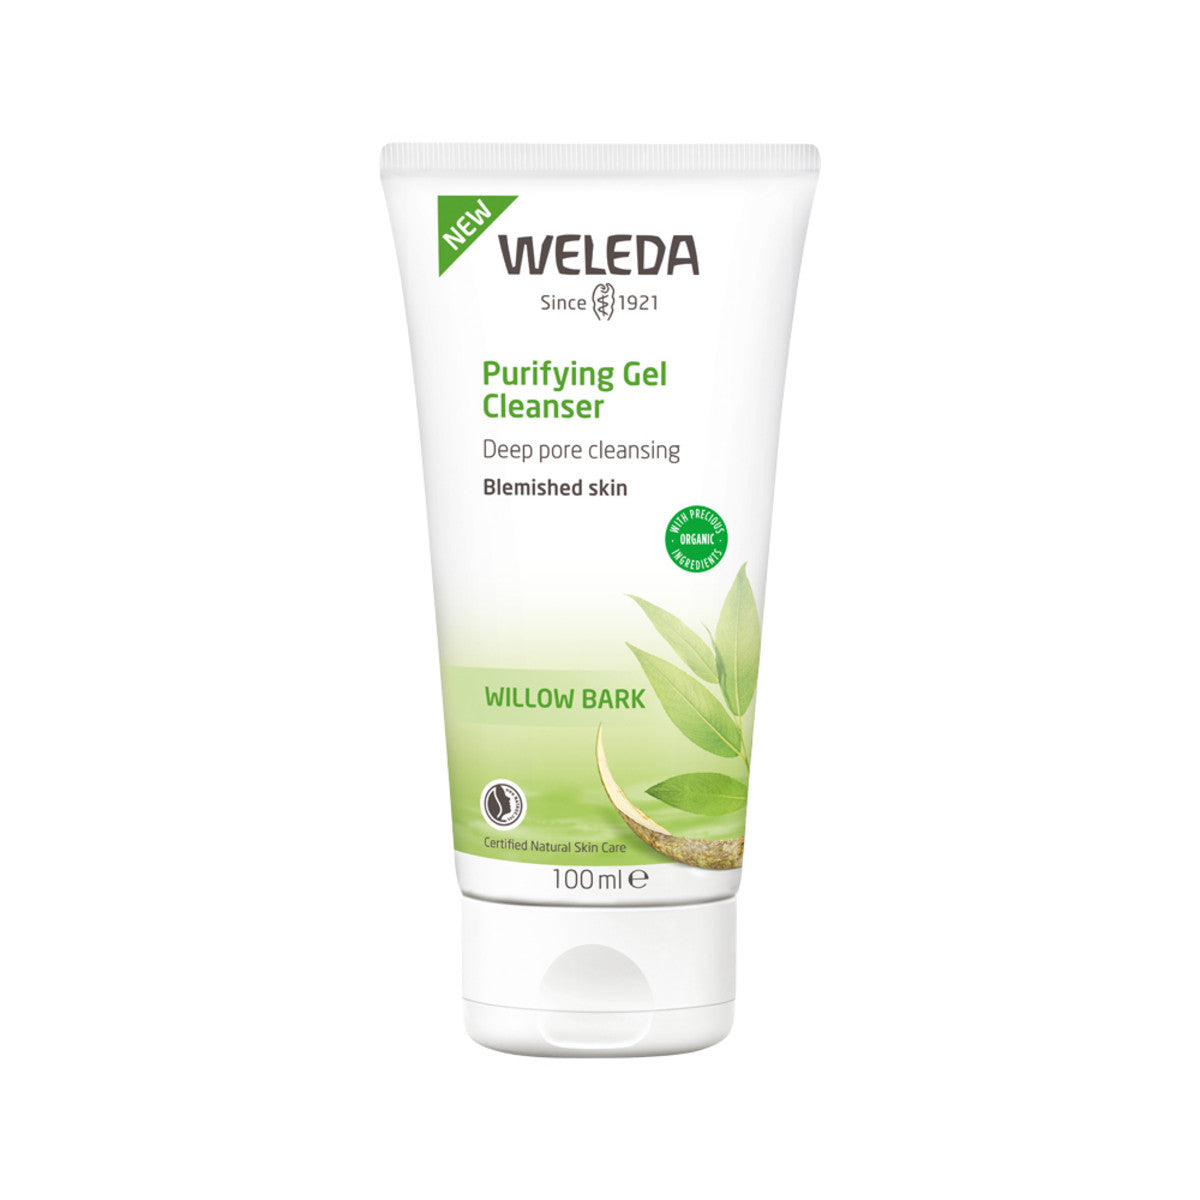 Weleda - Willow Bark Purifying Gel Cleanser